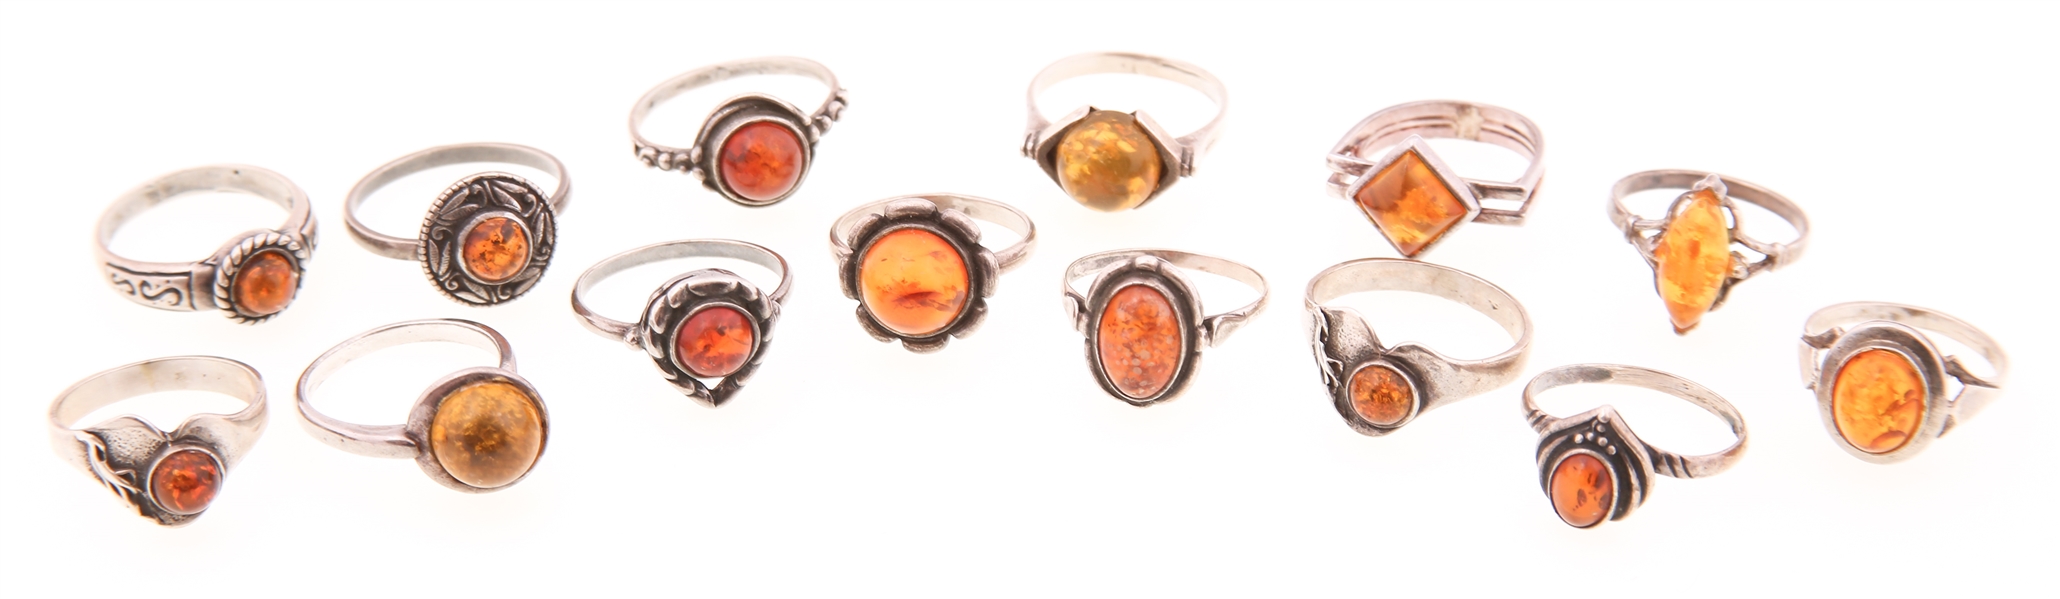 STERLING SILVER AMBER RINGS - LOT OF 14